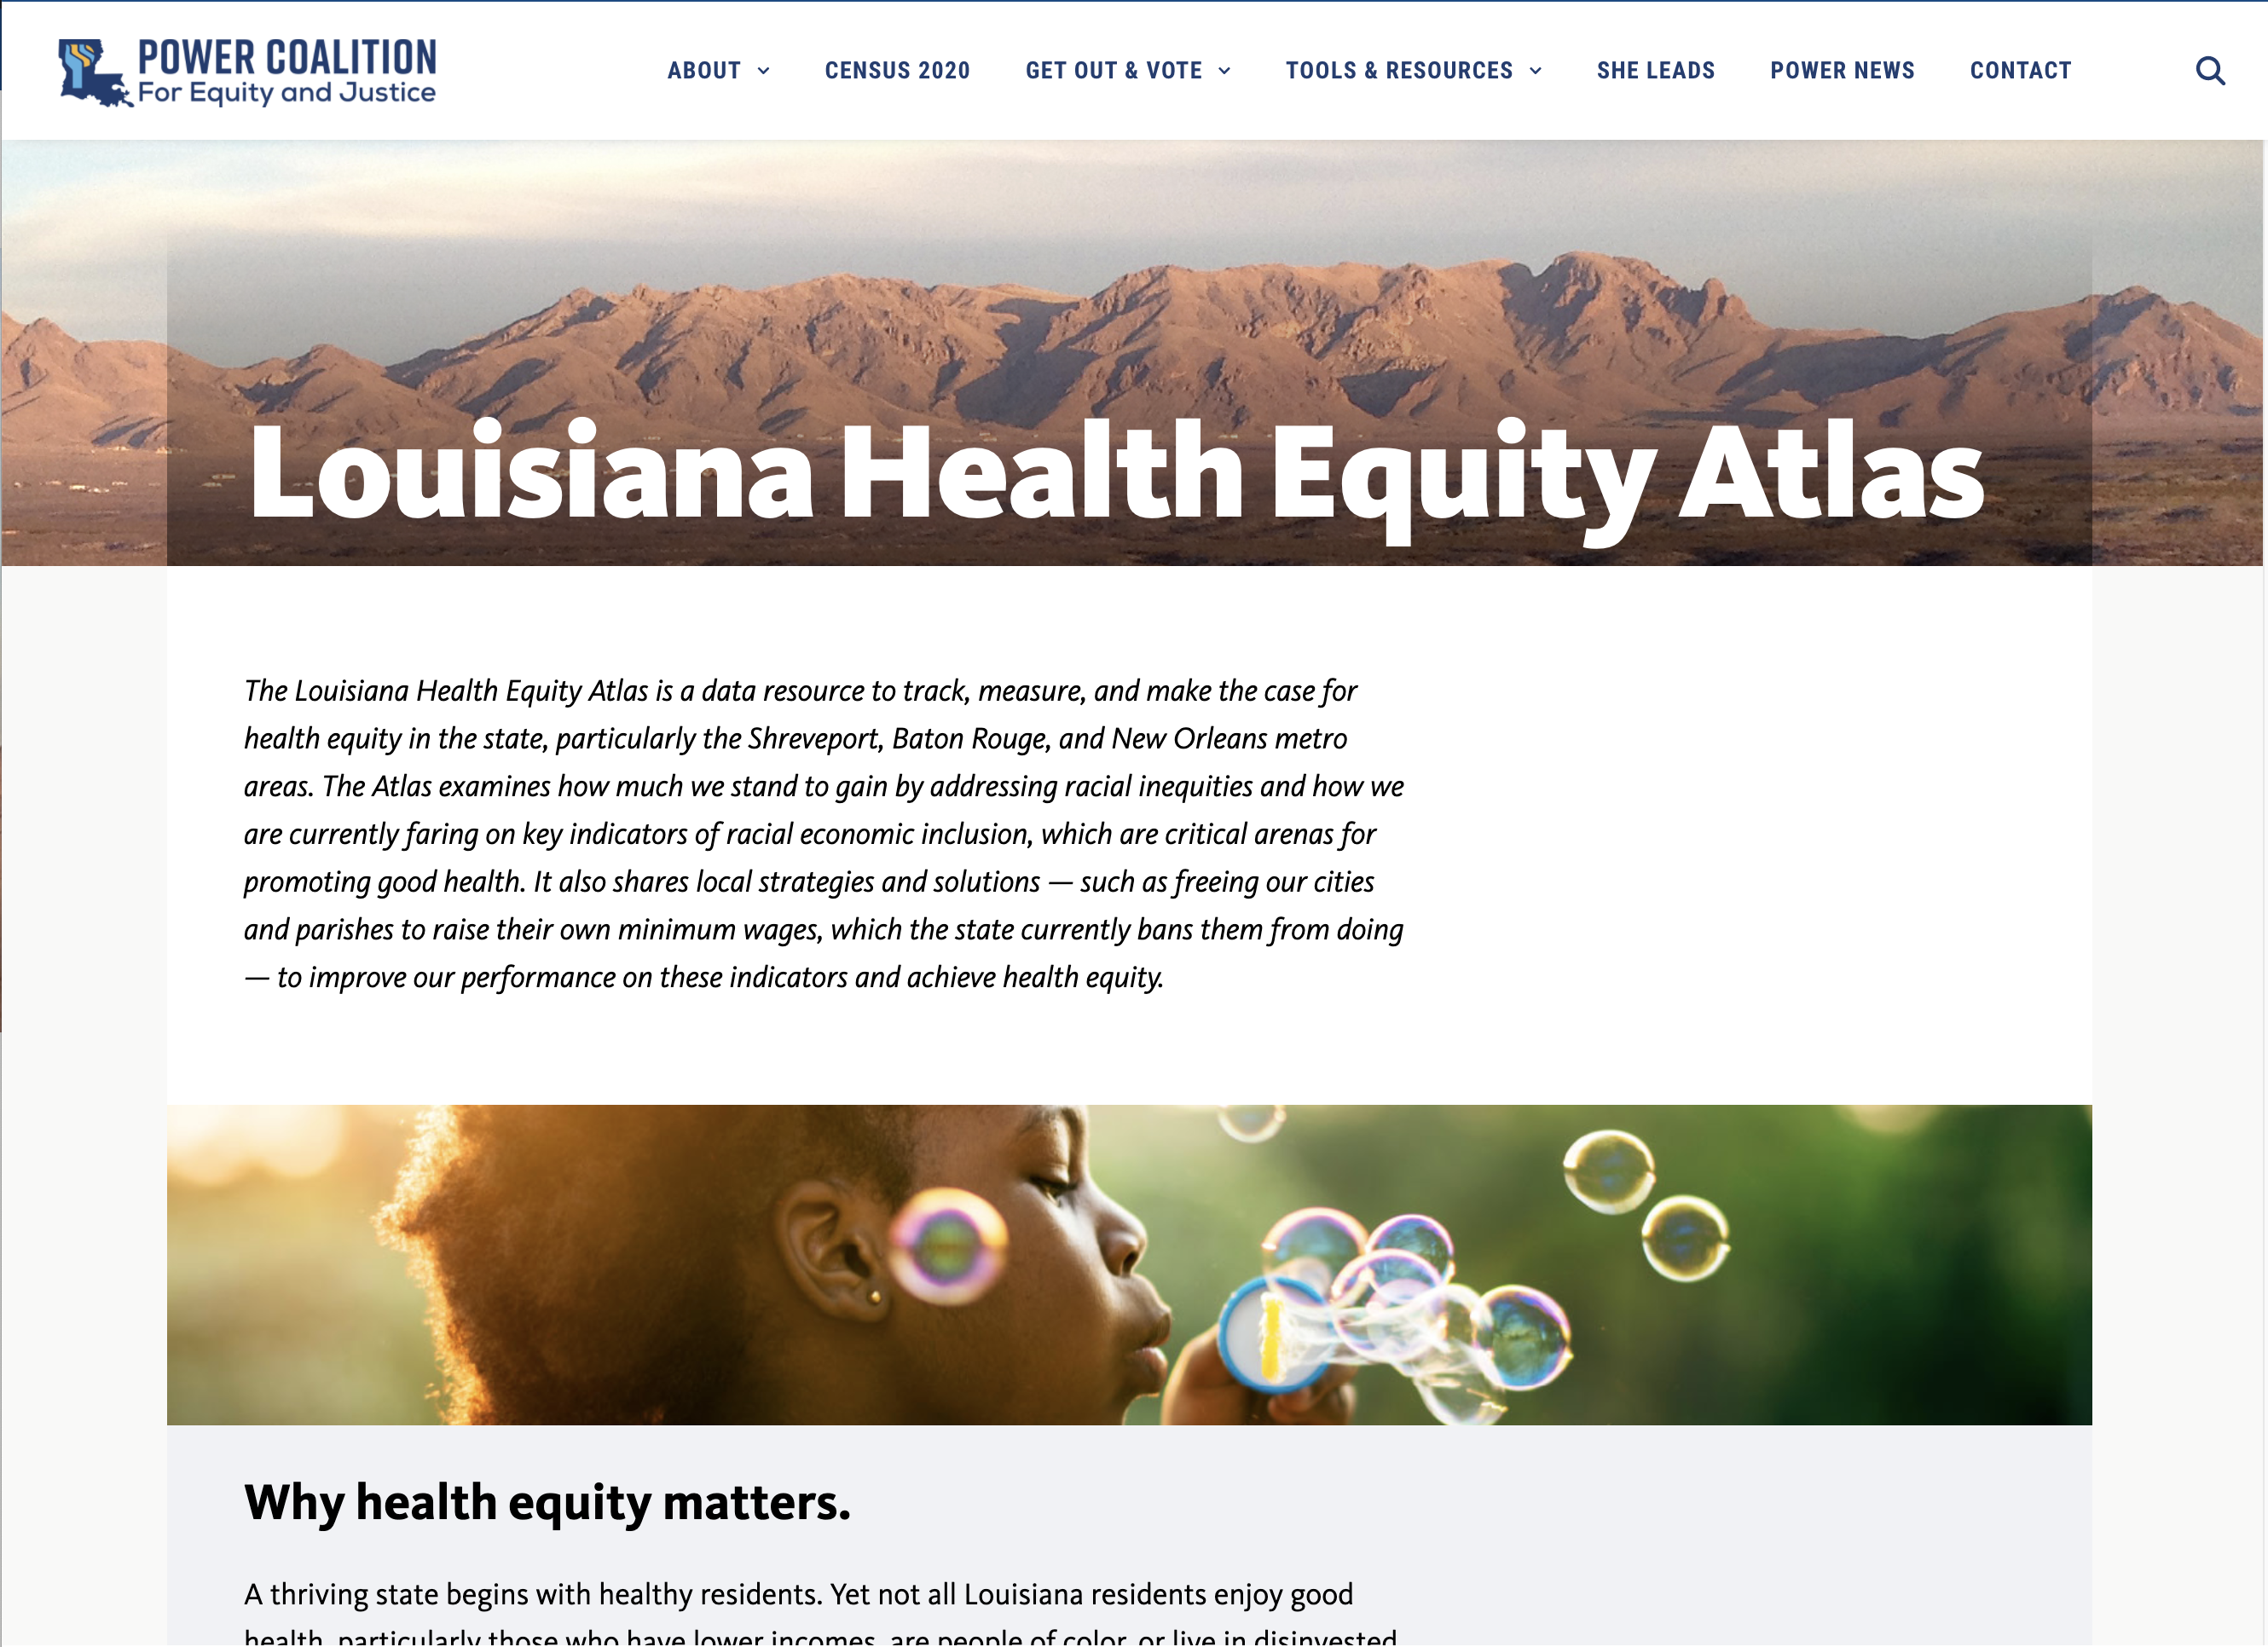 Power Coalition for Equity and Justice and PolicyLink Release Louisiana Health Equity Atlas